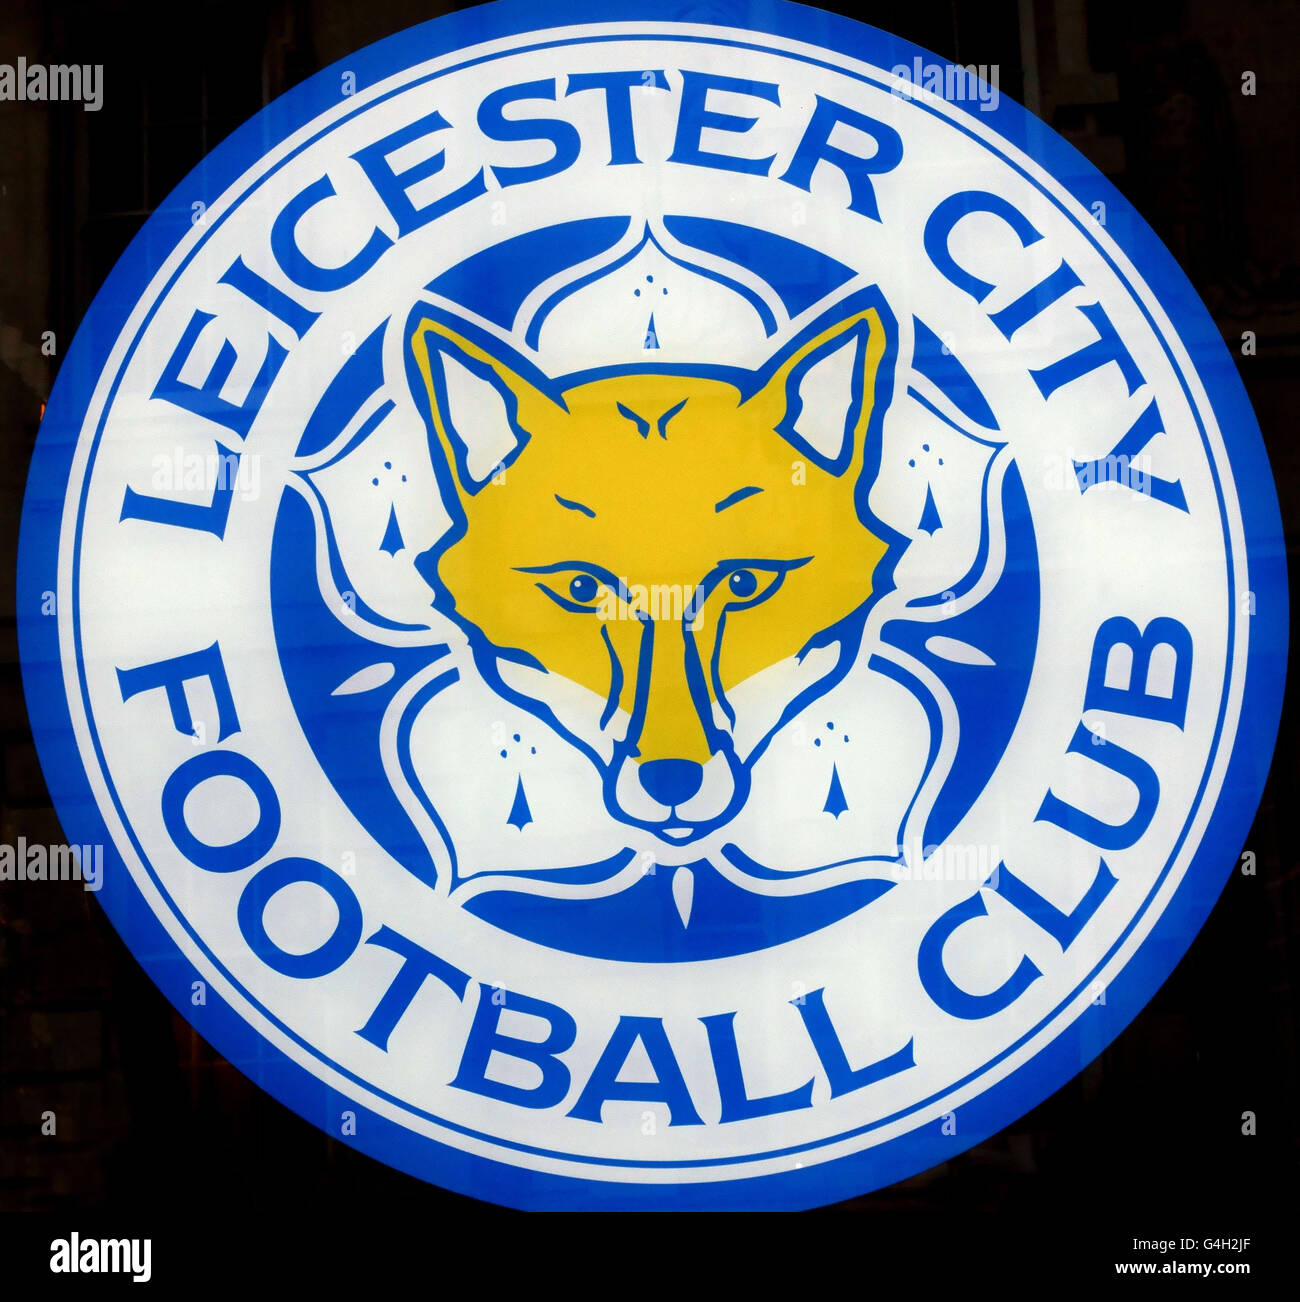 Logo of Leicester City Football Club, Premiership Champions 2015-2016, Leicester, England Stock Photo